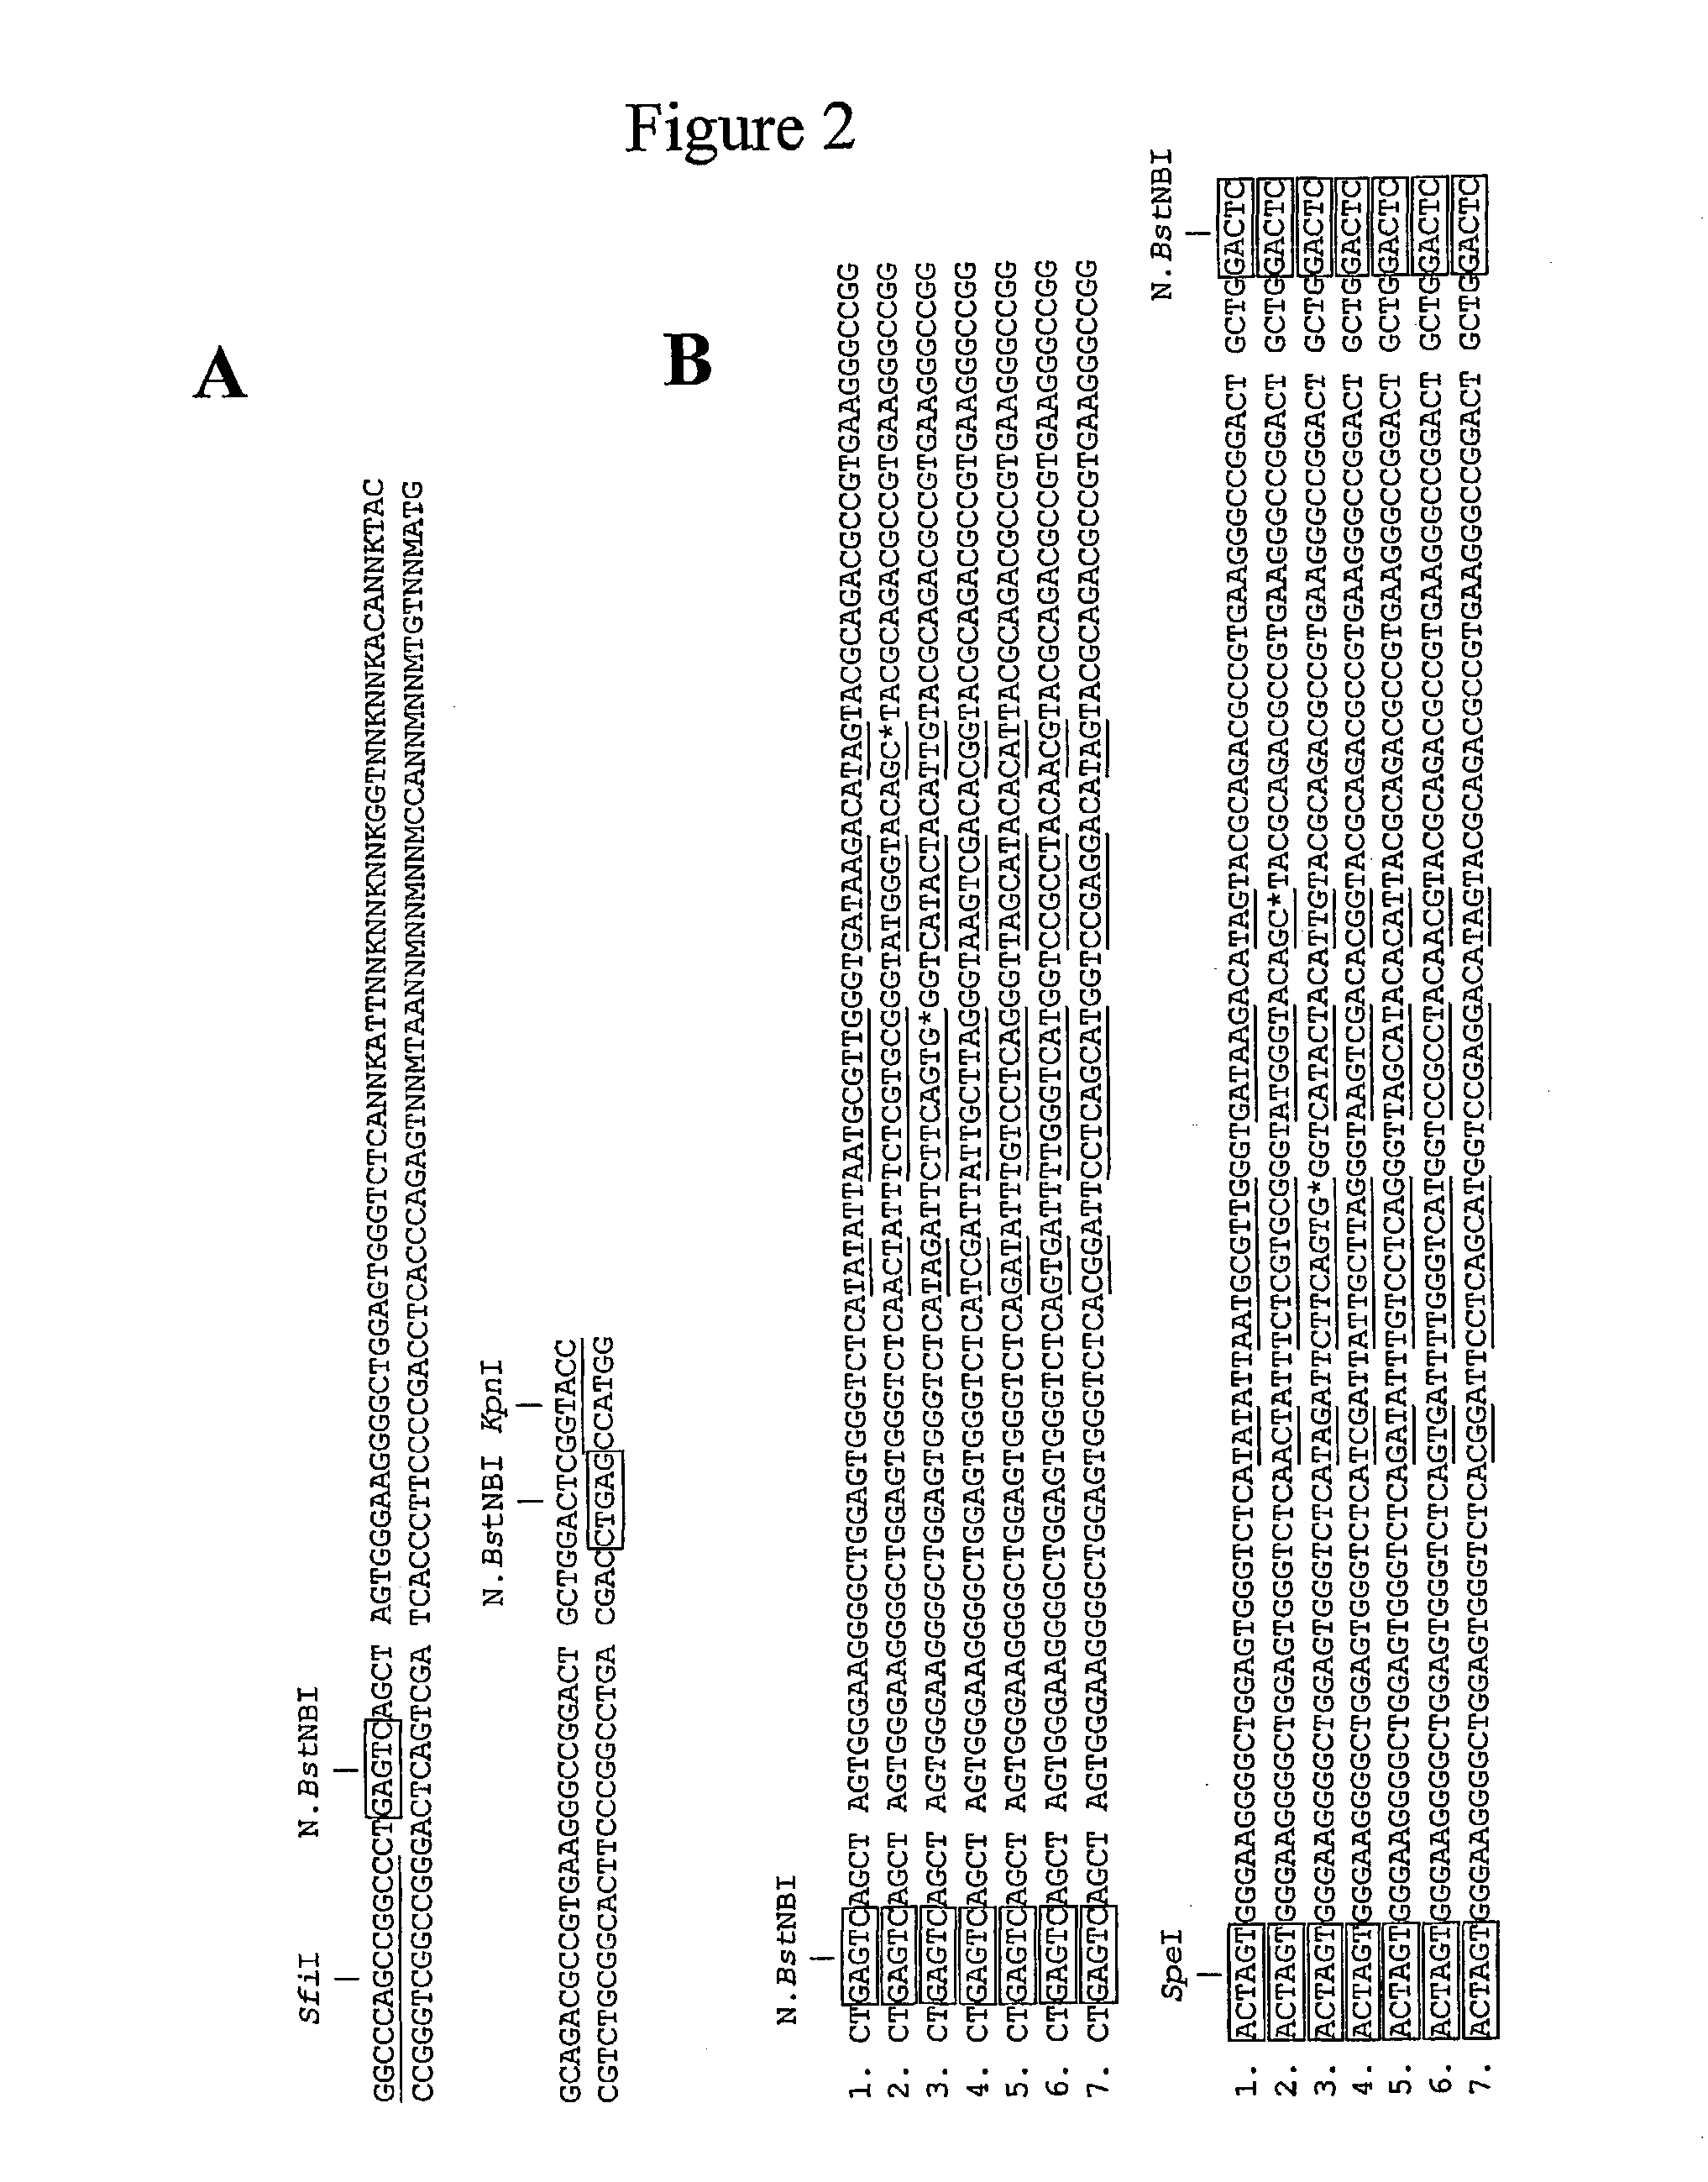 Concatenated nucleic acid sequence